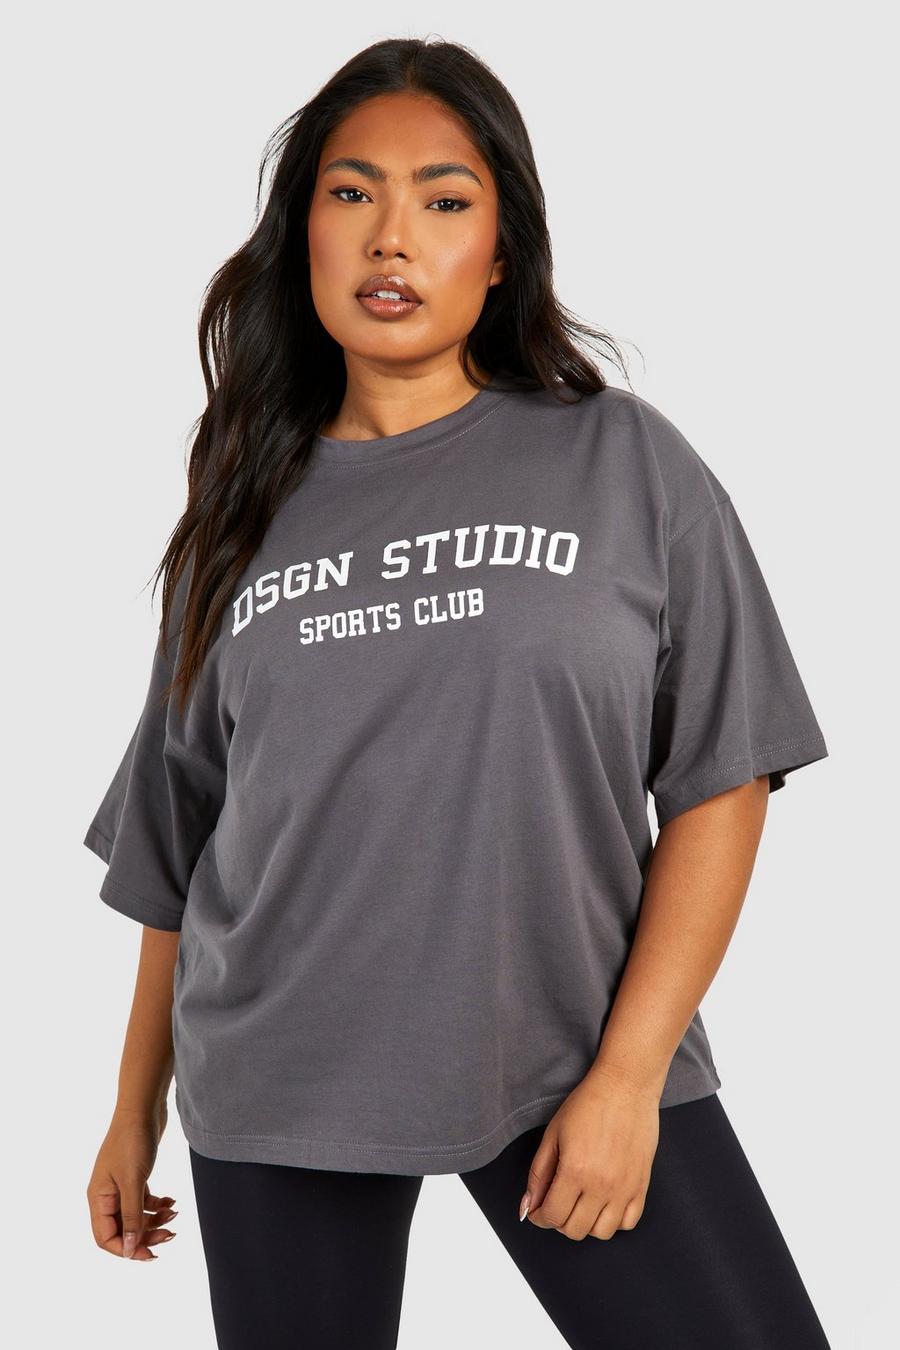 Charcoal Plus Oversized Dsgn Studio Sports Club T-Shirt image number 1